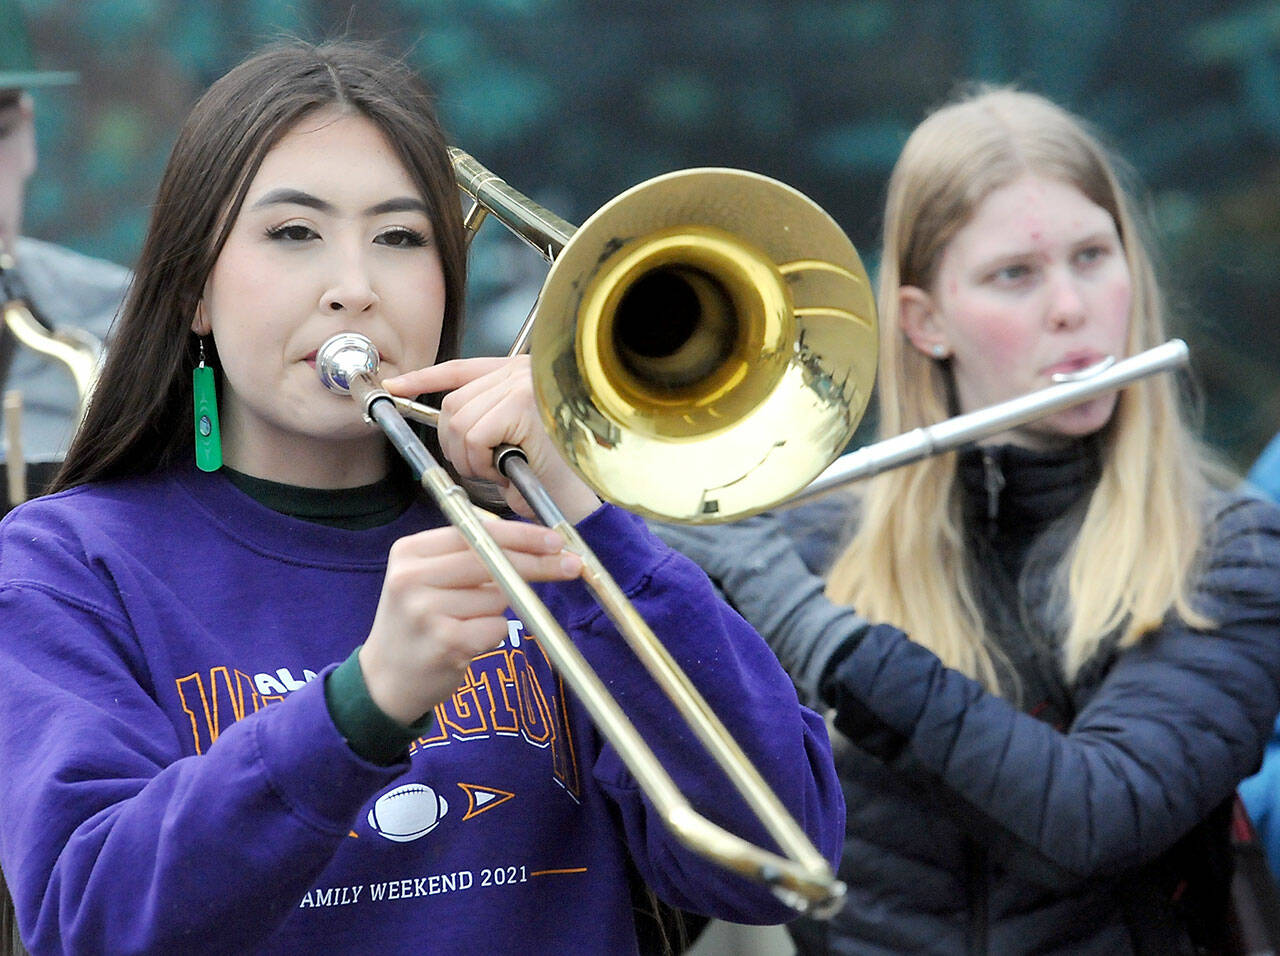 Port Angeles High School sophomore Danika Asgeirsson, 15, left, and junior Madeline Irwin, 16, perform with members of the school’s band during a fundraising performance at the Conrad Dyar Memorial Fountain in February in downtown Port Angeles. The band was accepting donations and selling bags of Rainshadow Roasters coffee to help pay their way to a performance on March 26 at Carnegie Hall in New York City, along with the school’s choir and orchestra. (Keith Thorpe/Peninsula Daily News)